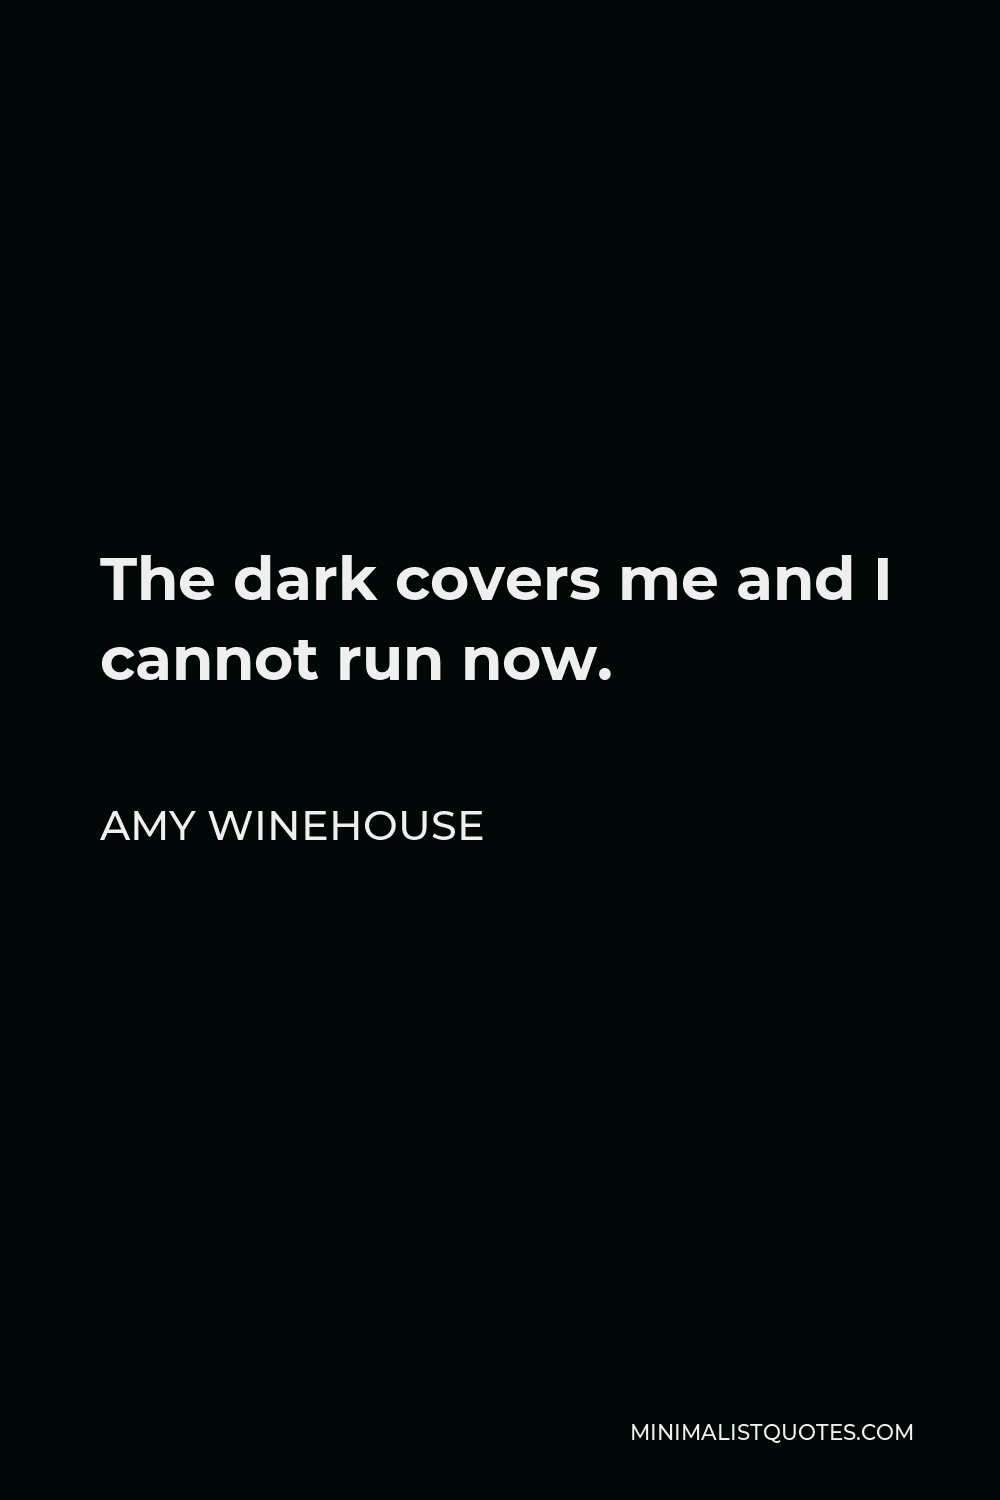 Amy Winehouse Quote - The dark covers me and I cannot run now.